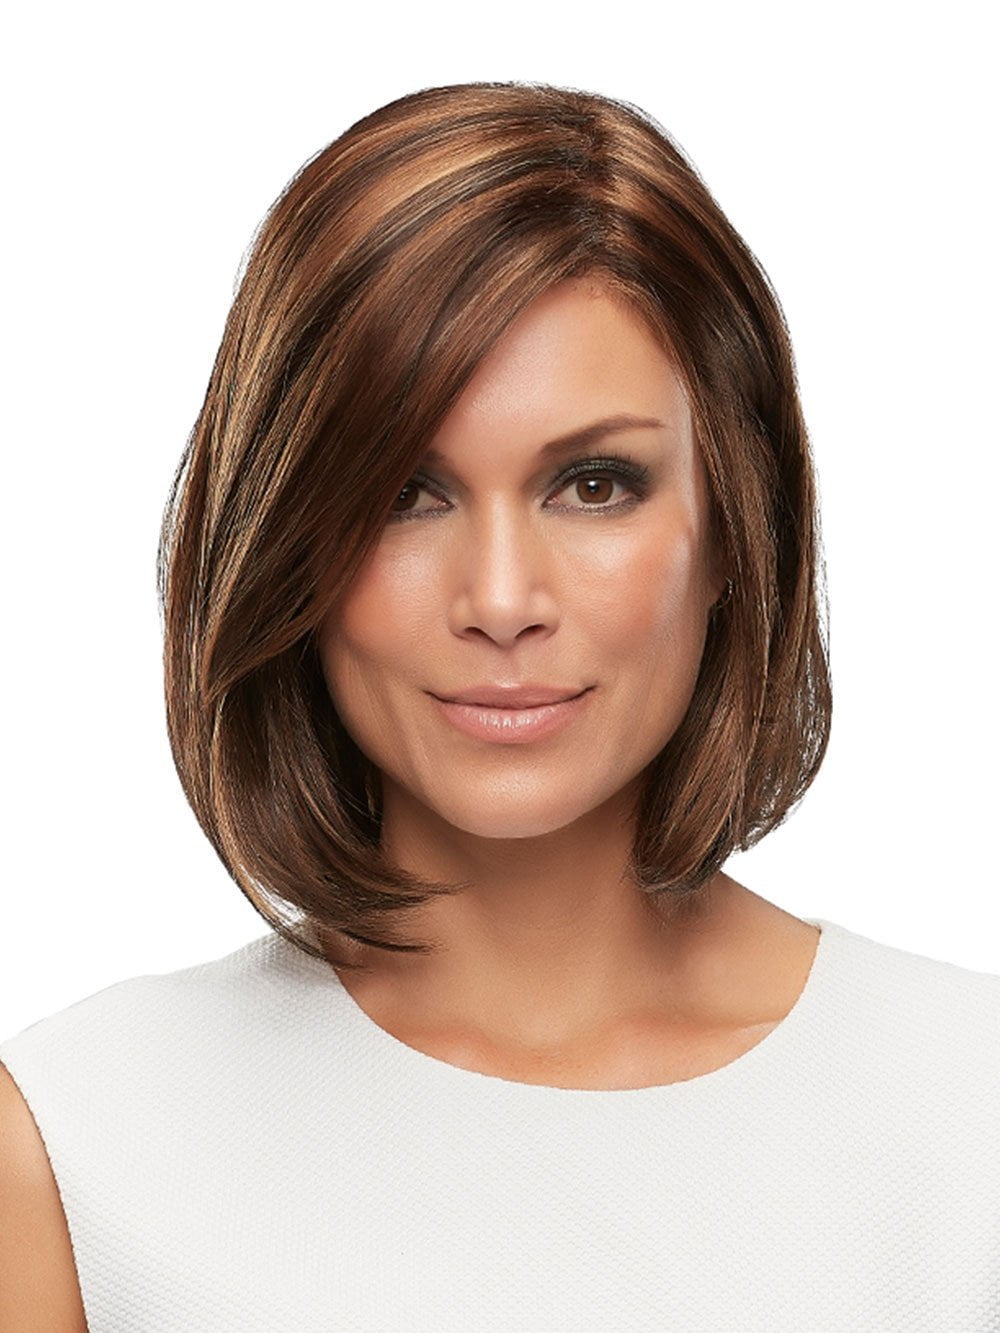 The sheer lace front allows you to change your look and style your hair away from the face